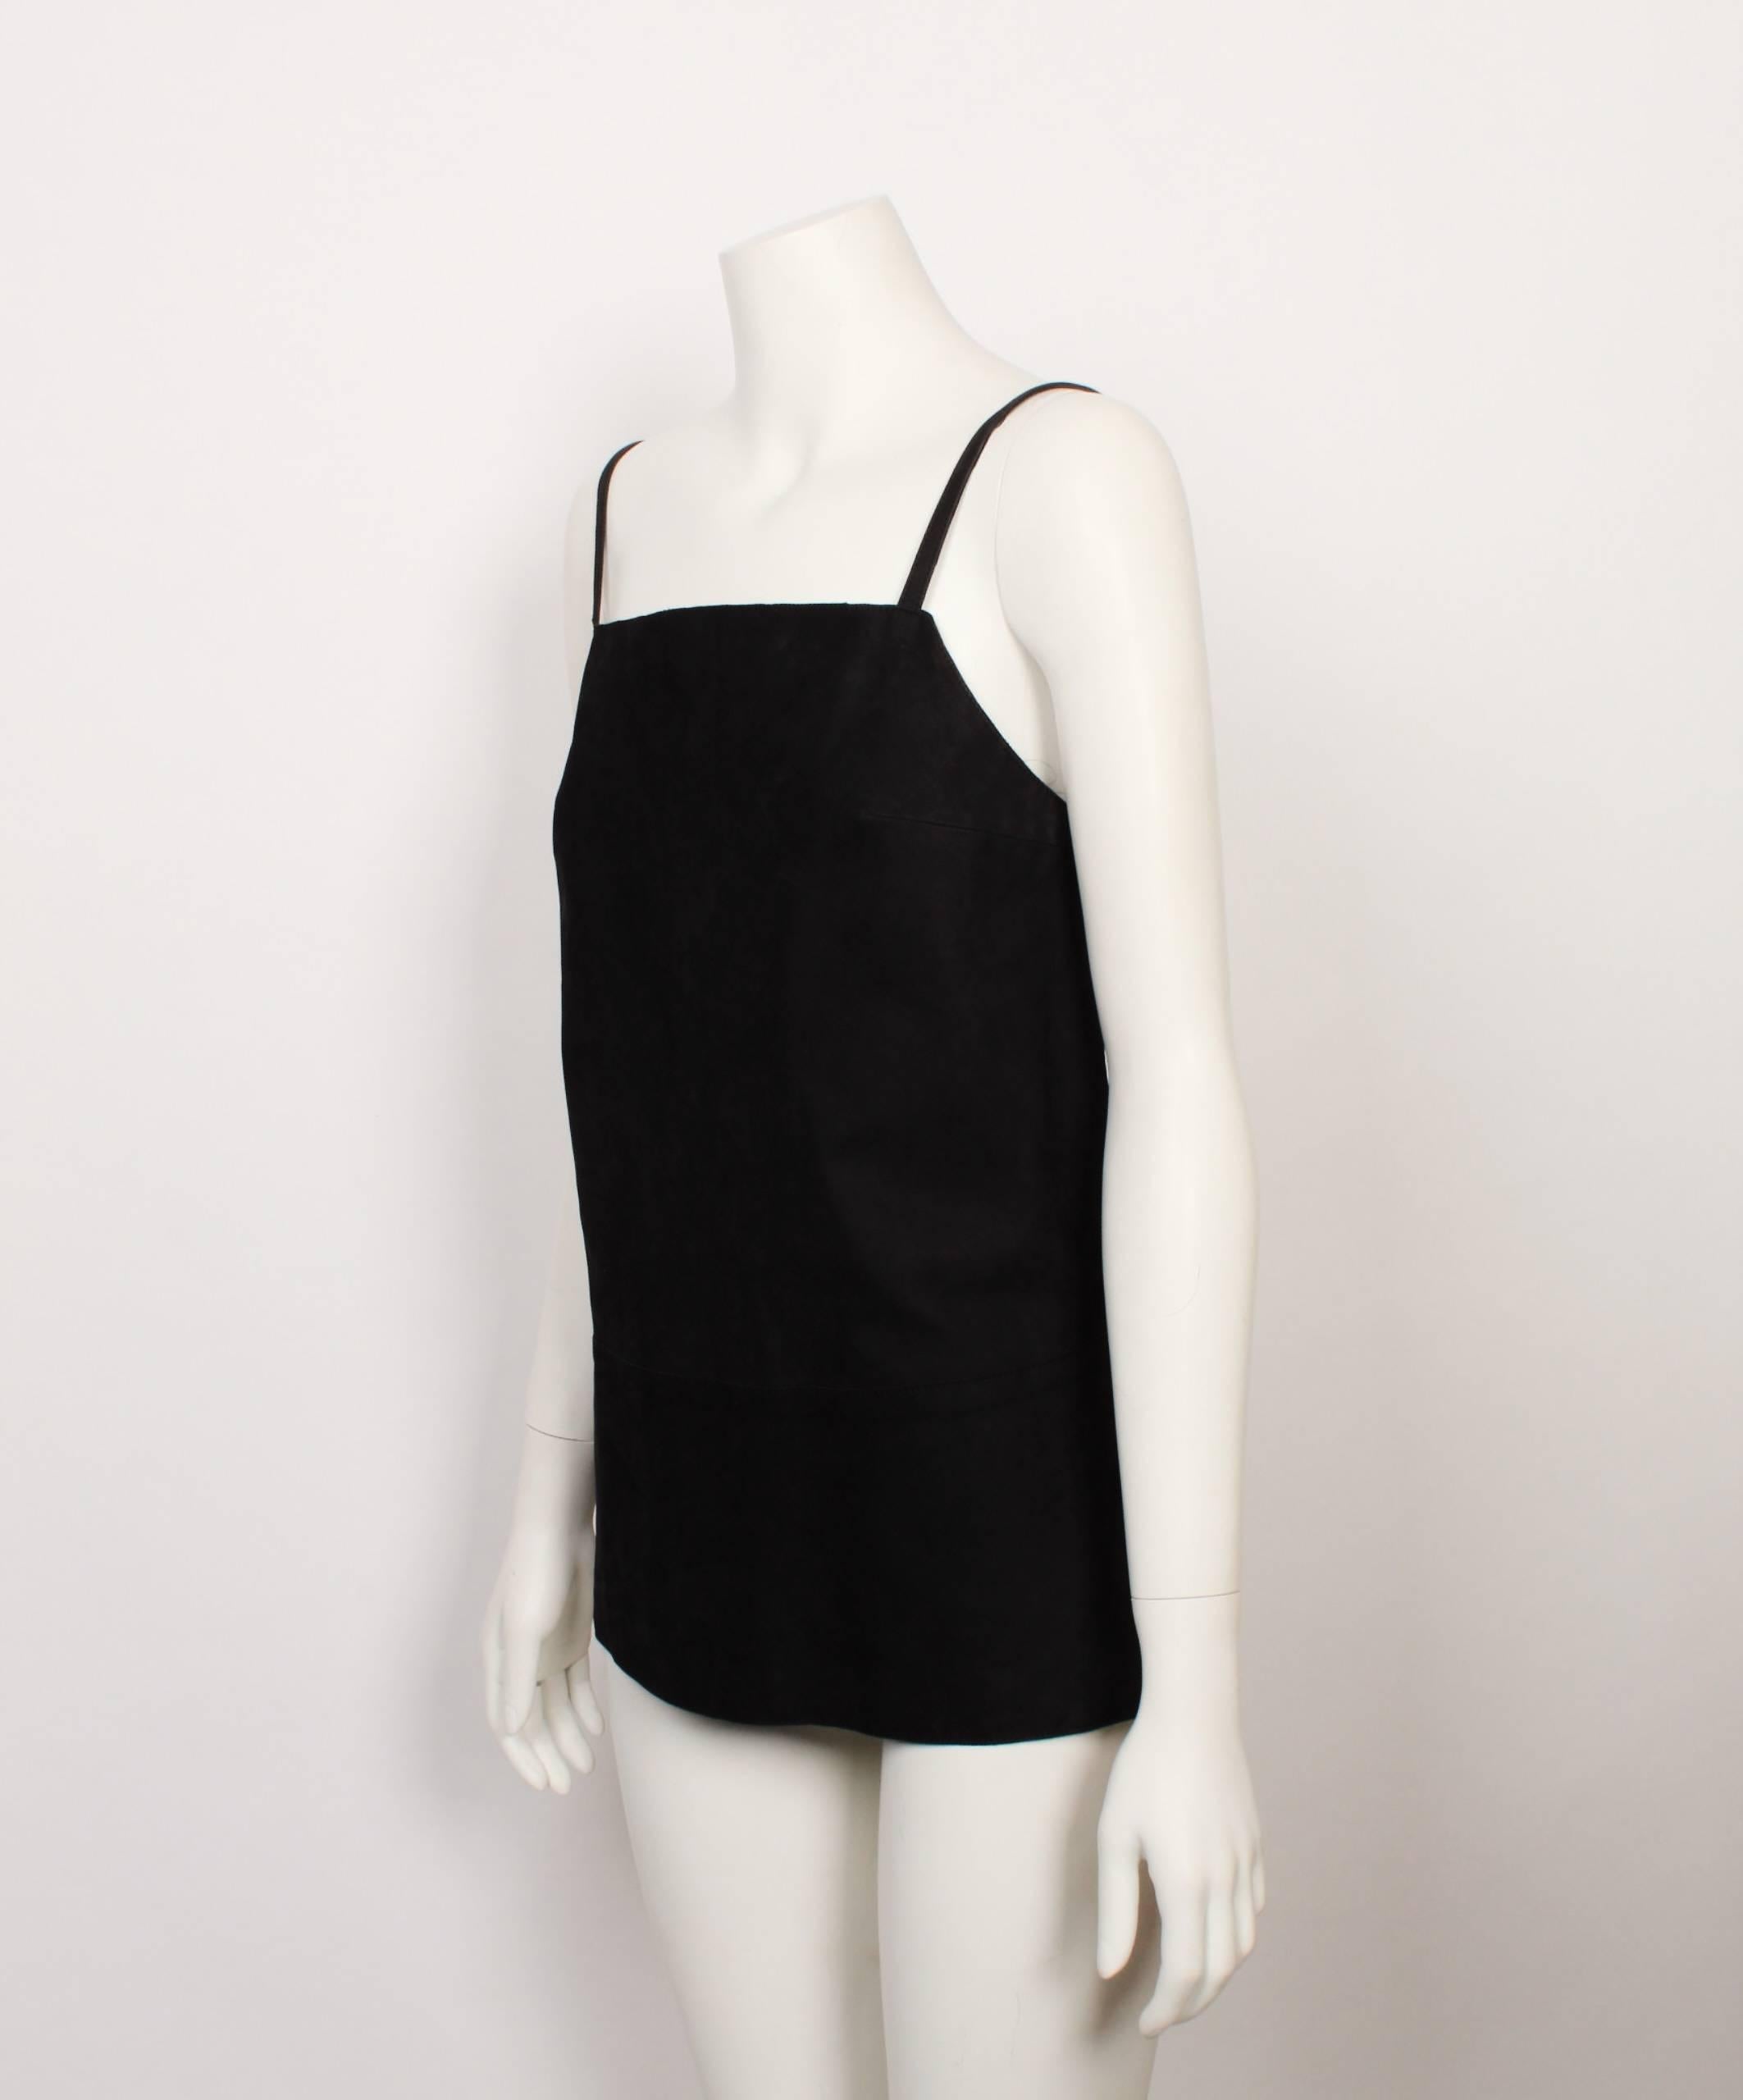 CoSTUME National black suede backless overlay bib top with square front neckline, spaghetti straps and bold square backless feature. Clean, strong, minimalist lines. A classic CoSTUME National example. 
Fully lined with back invisible zipper. Made